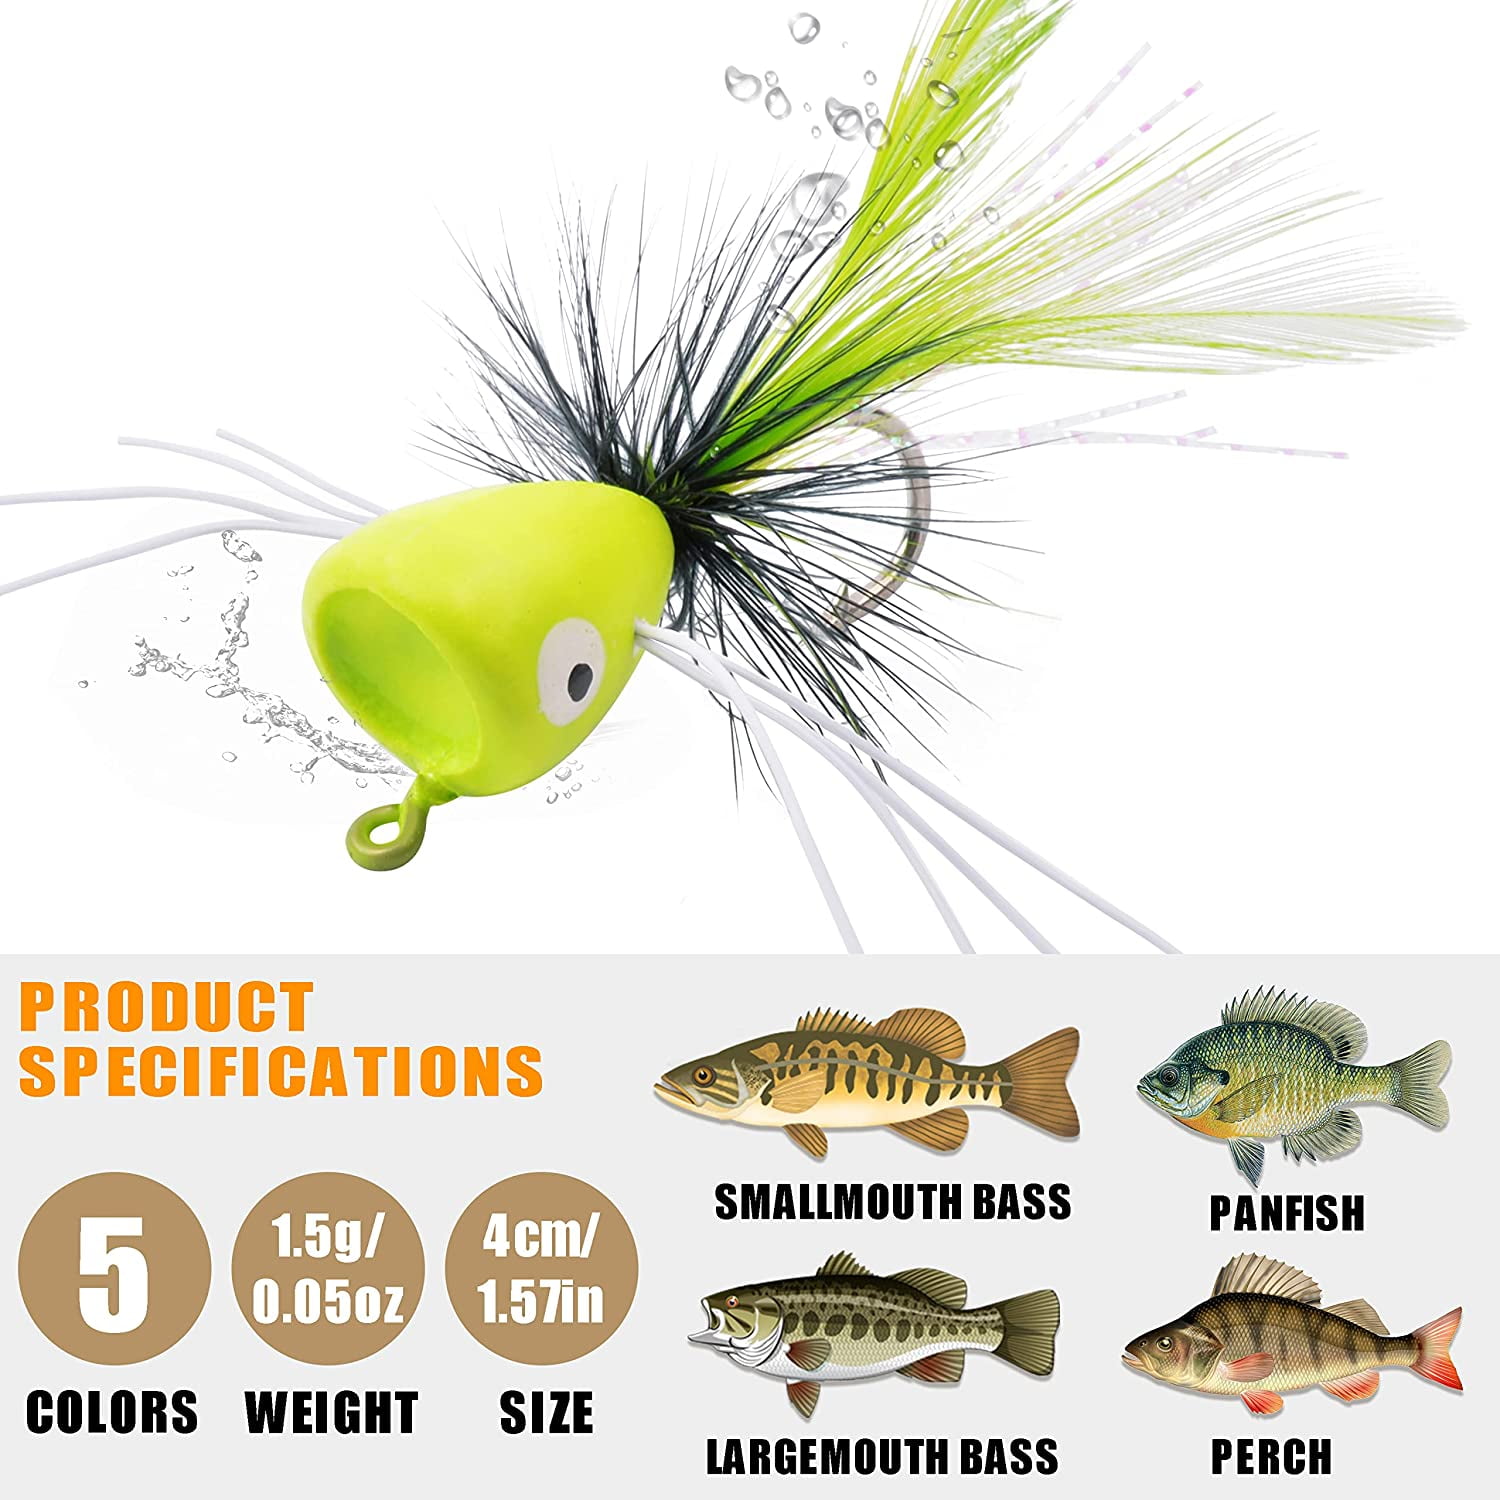 OROOTL Fly Fishing Popper Flies, 12pcs Fly Popper Lures Bass Panfish  Bluegill Crappie Popping Bug Sunfish Trout Salmon Poppers Flys Kit for Fly  Fishing 